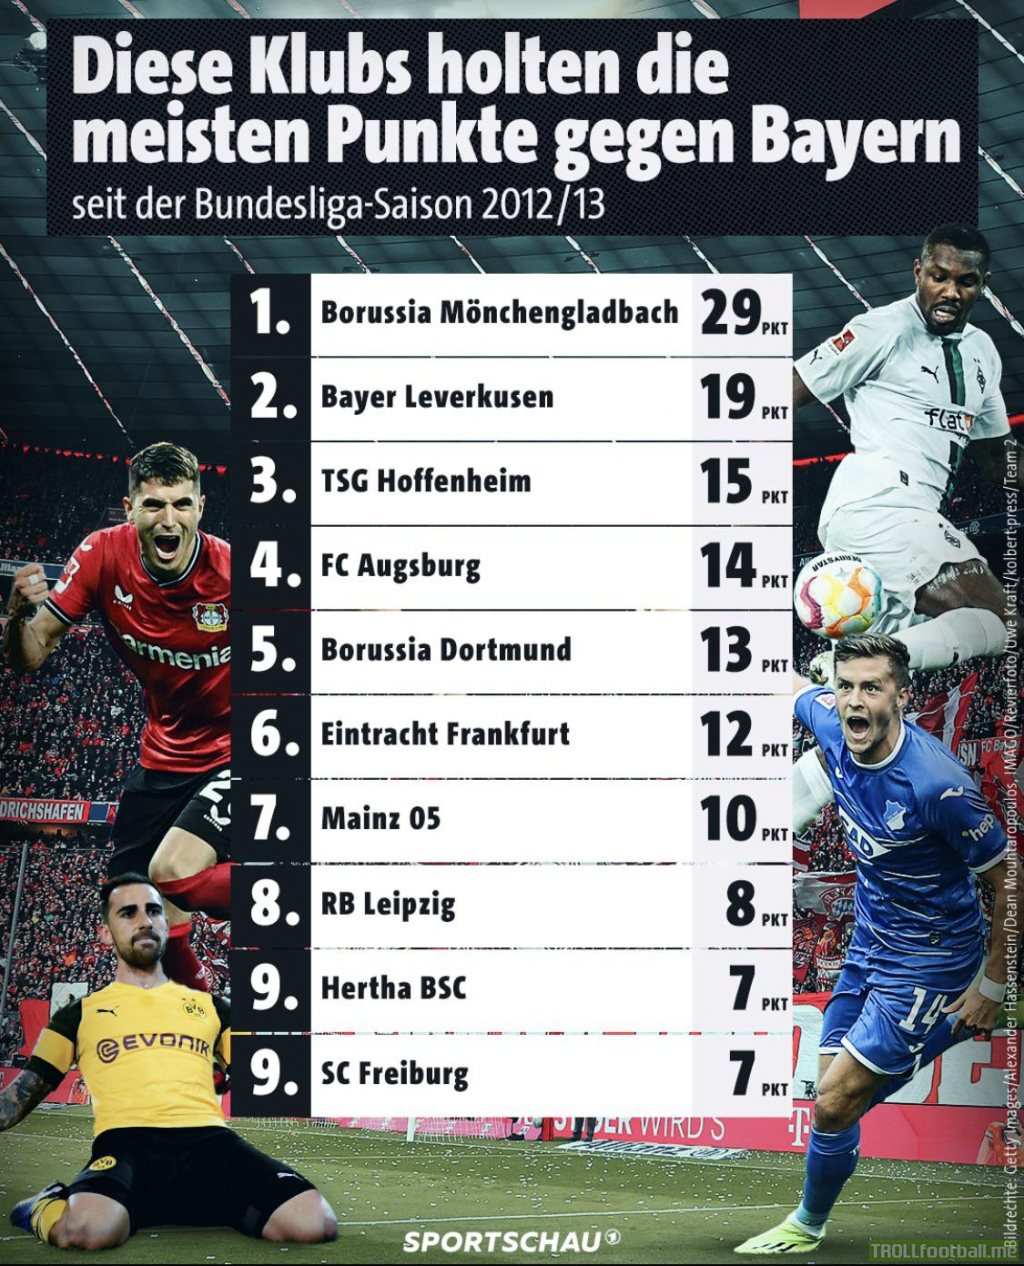 [Sportschau] Bundesliga teams with the most points collected against Bayern since 2012